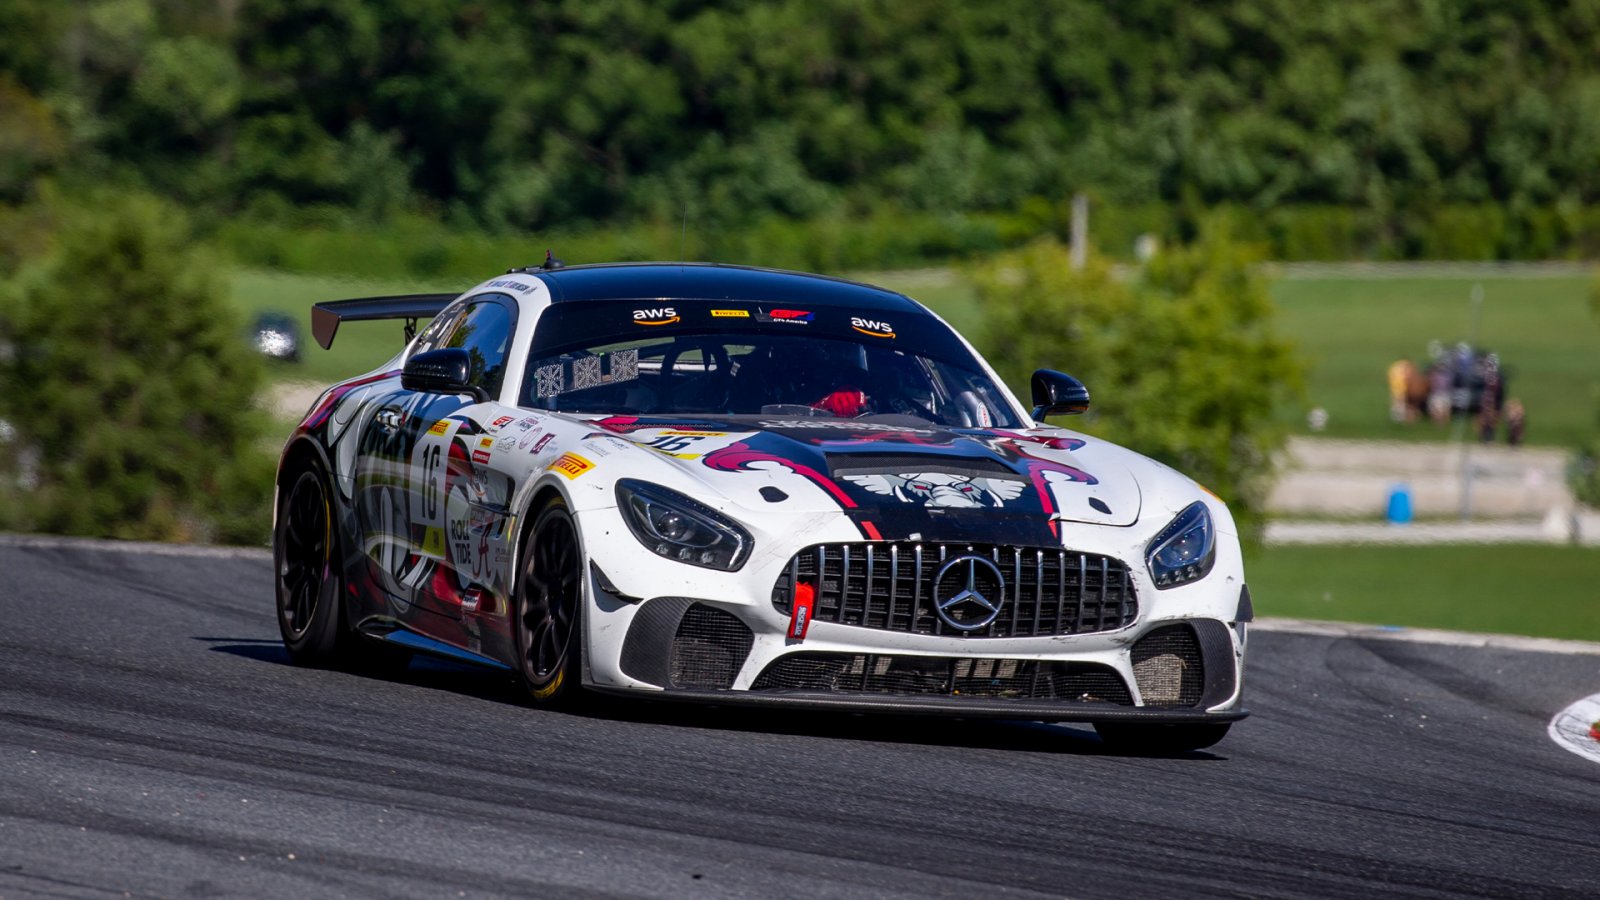 Rearden Racing Collects More Wins and Podium Finishes at Road America in Pirelli GT4 America GT4 SprintX, GT4 Sprint Action